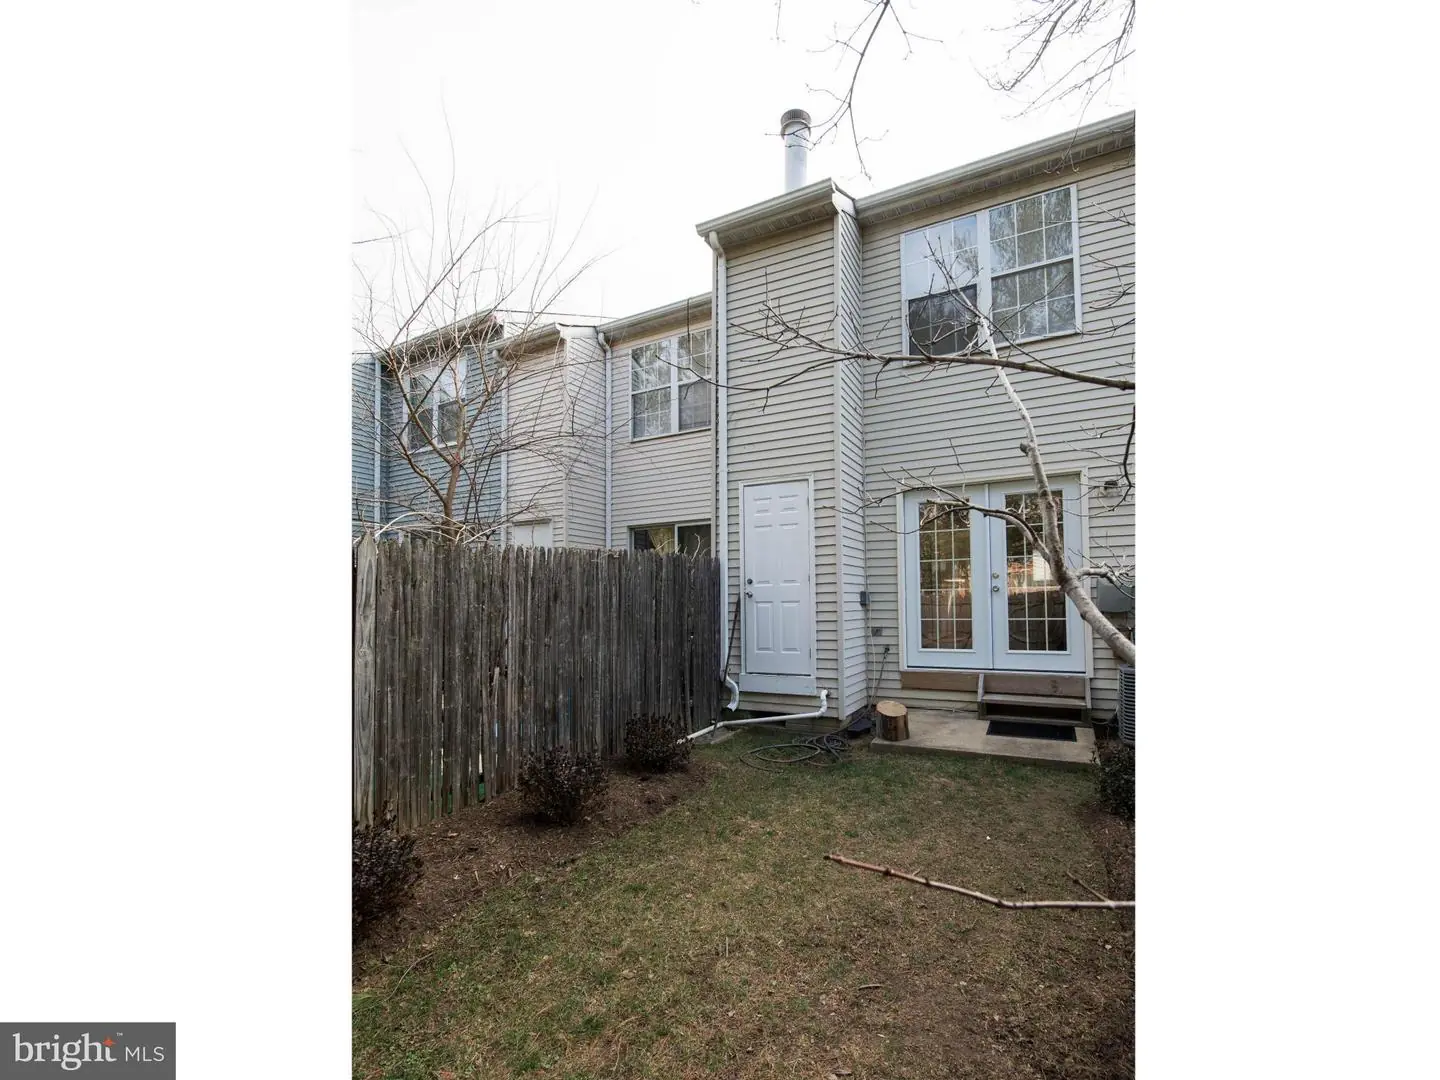 1001782513-300562830855-2021-09-05-21-05-51  |   | Falls Church Delaware Real Estate For Sale | MLS# 1001782513  - Best of Northern Virginia